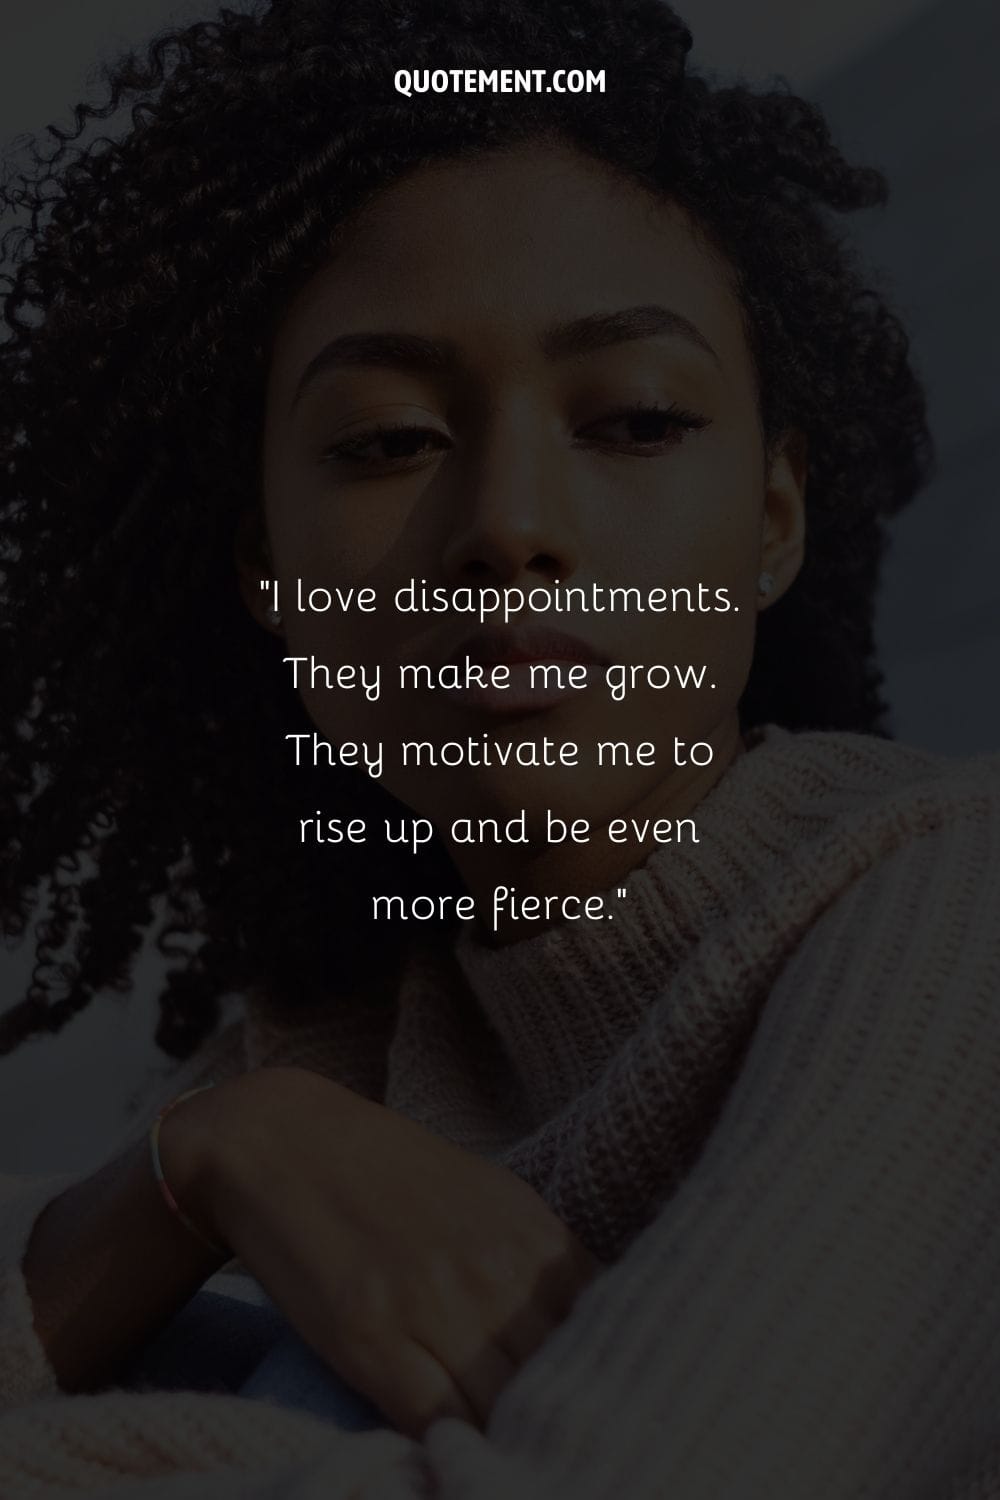 I love disappointments. They make me grow. They motivate me to rise up and be even more fierce